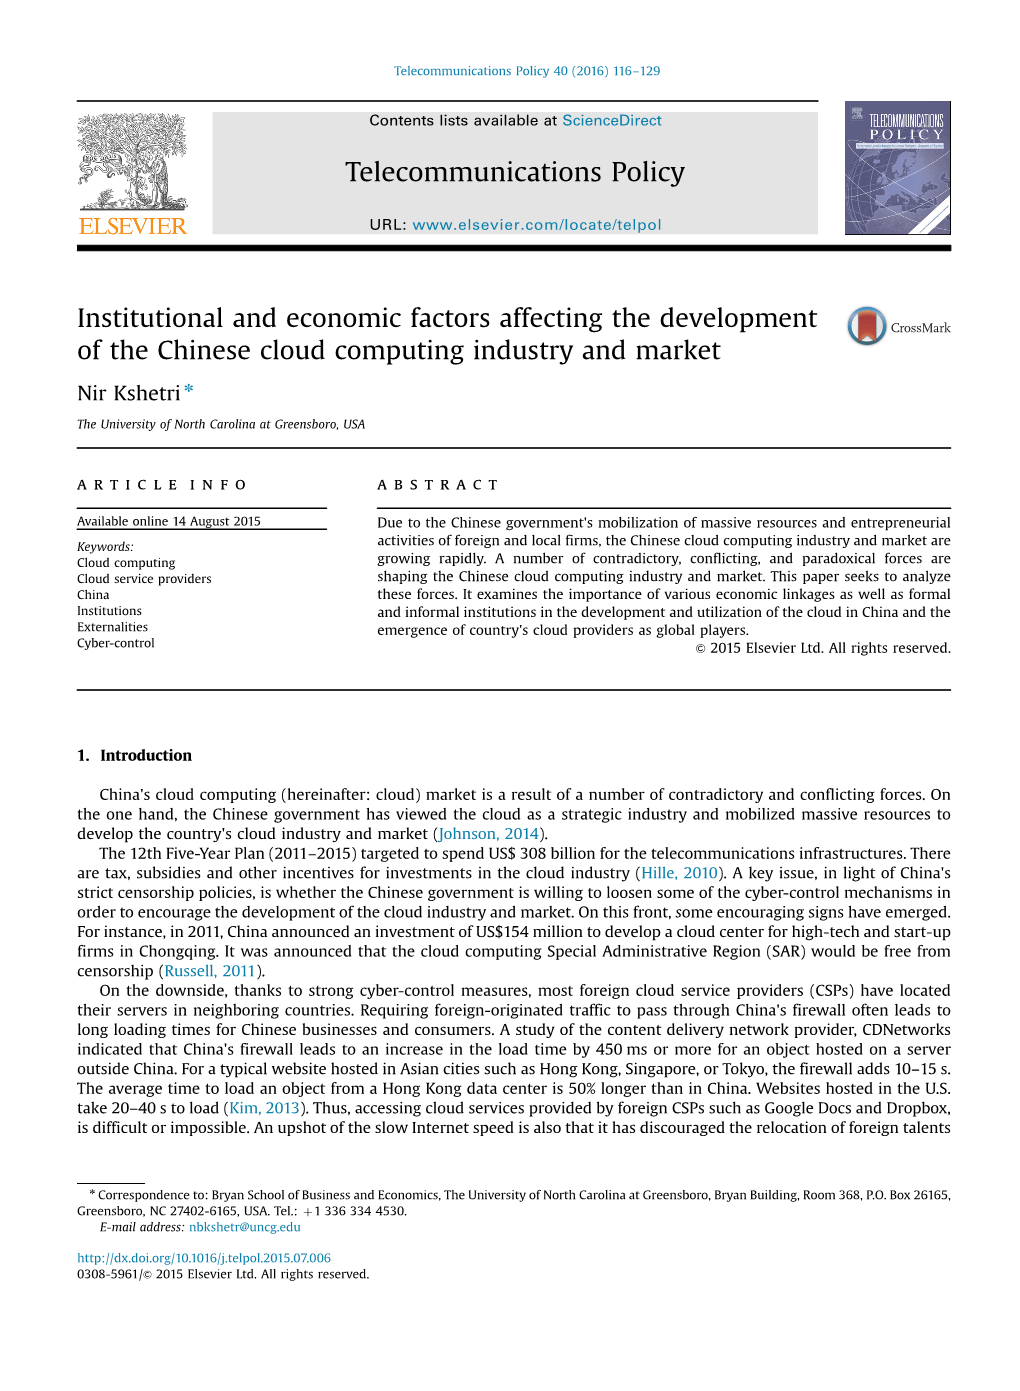 Institutional and Economic Factors Affecting the Development of the Chinese Cloud Computing Industry and Market